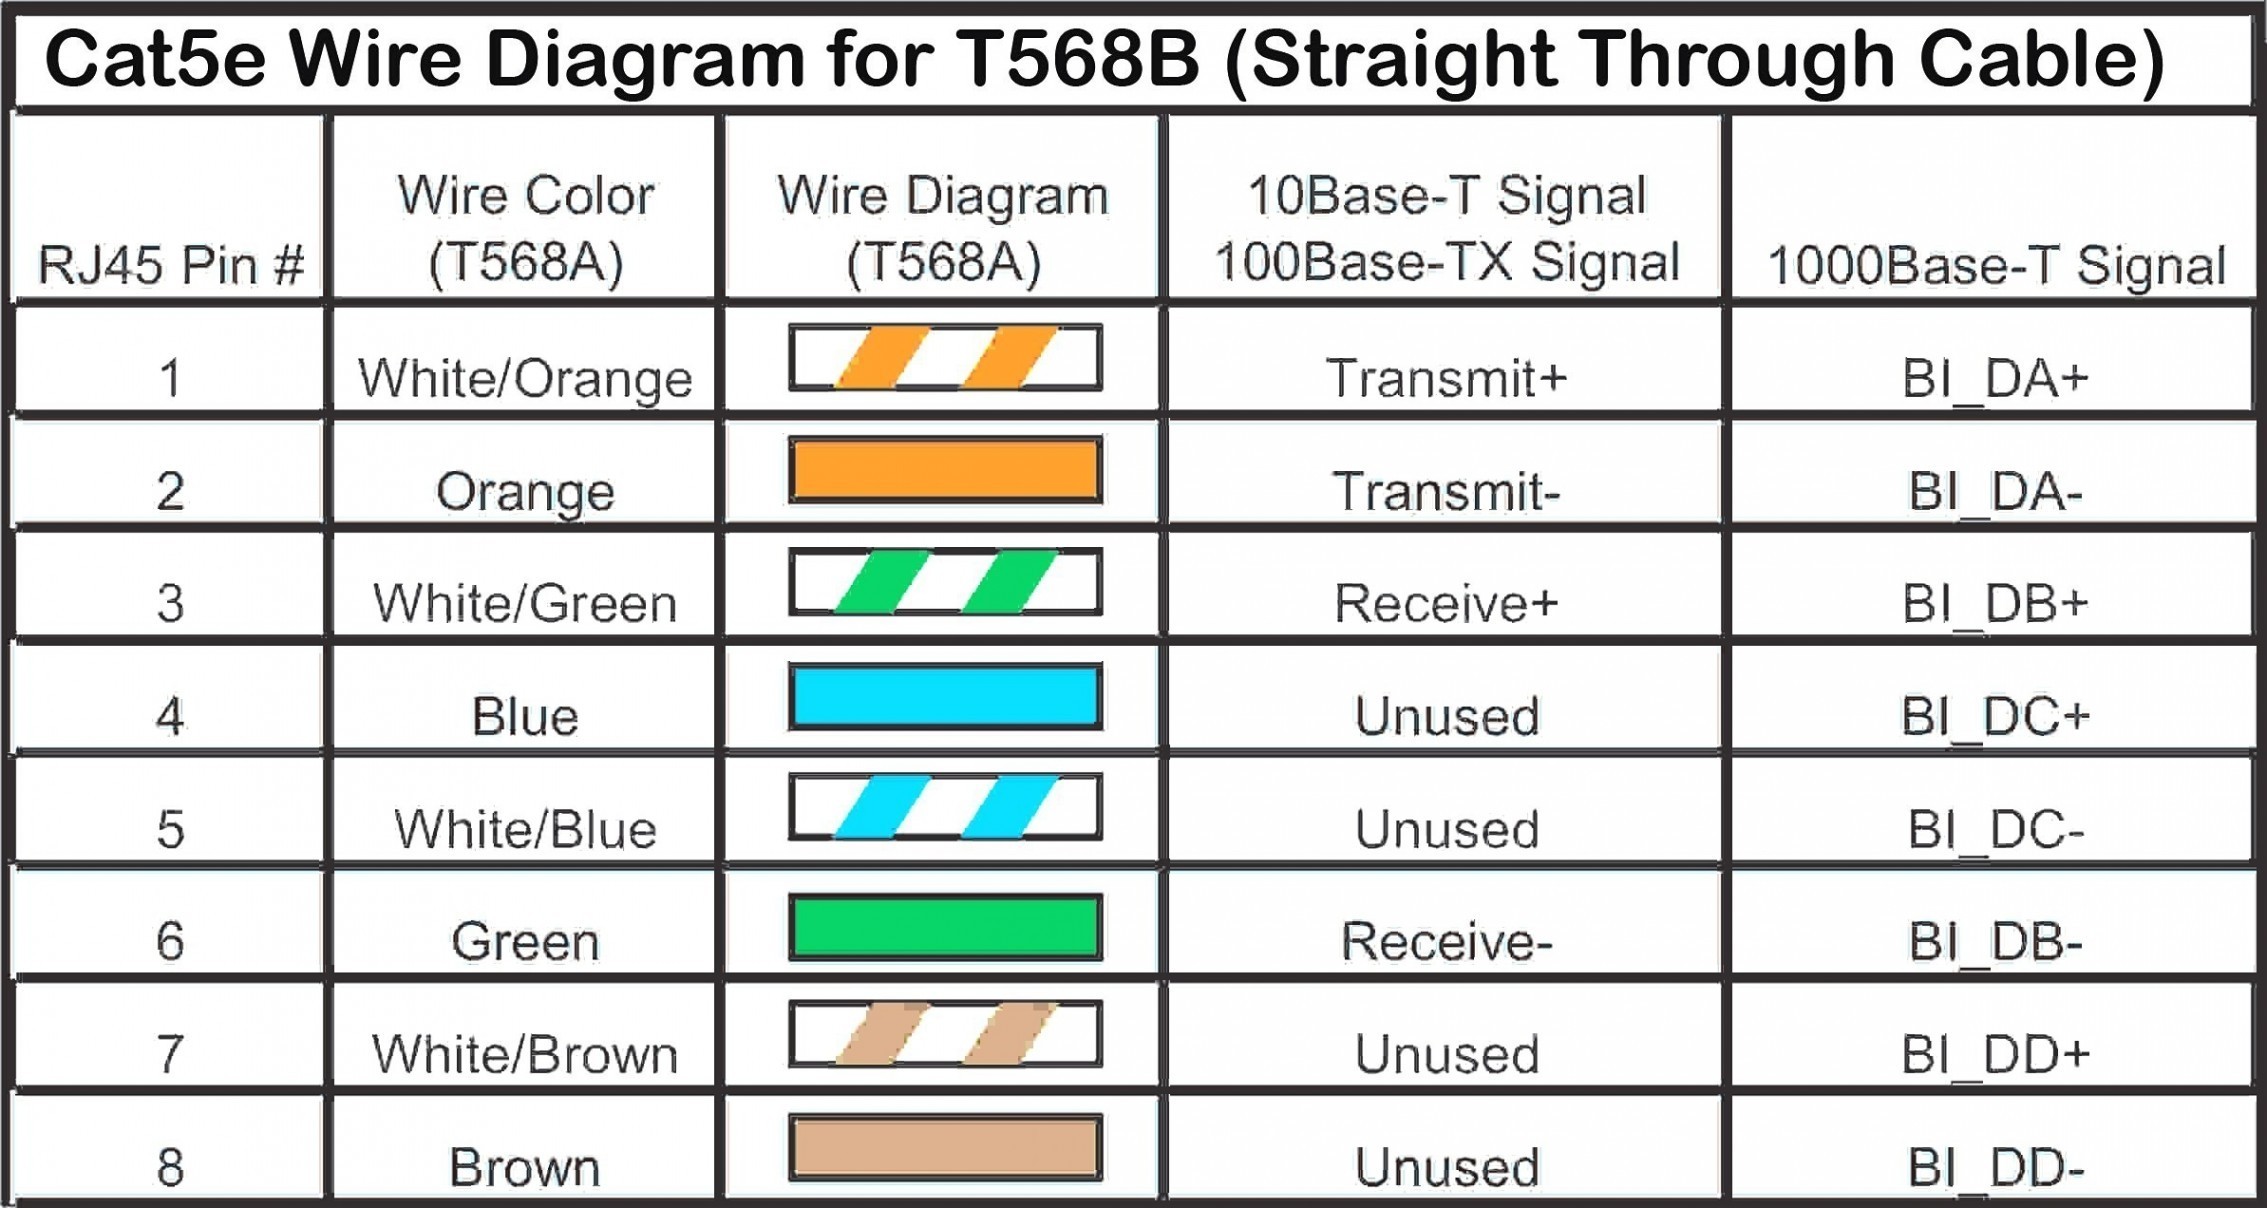 Ethernet Wiring Diagram 568a Refrence Ethernet Cable Wiring Diagram – Cat5e Wire Diagram New Ethernet